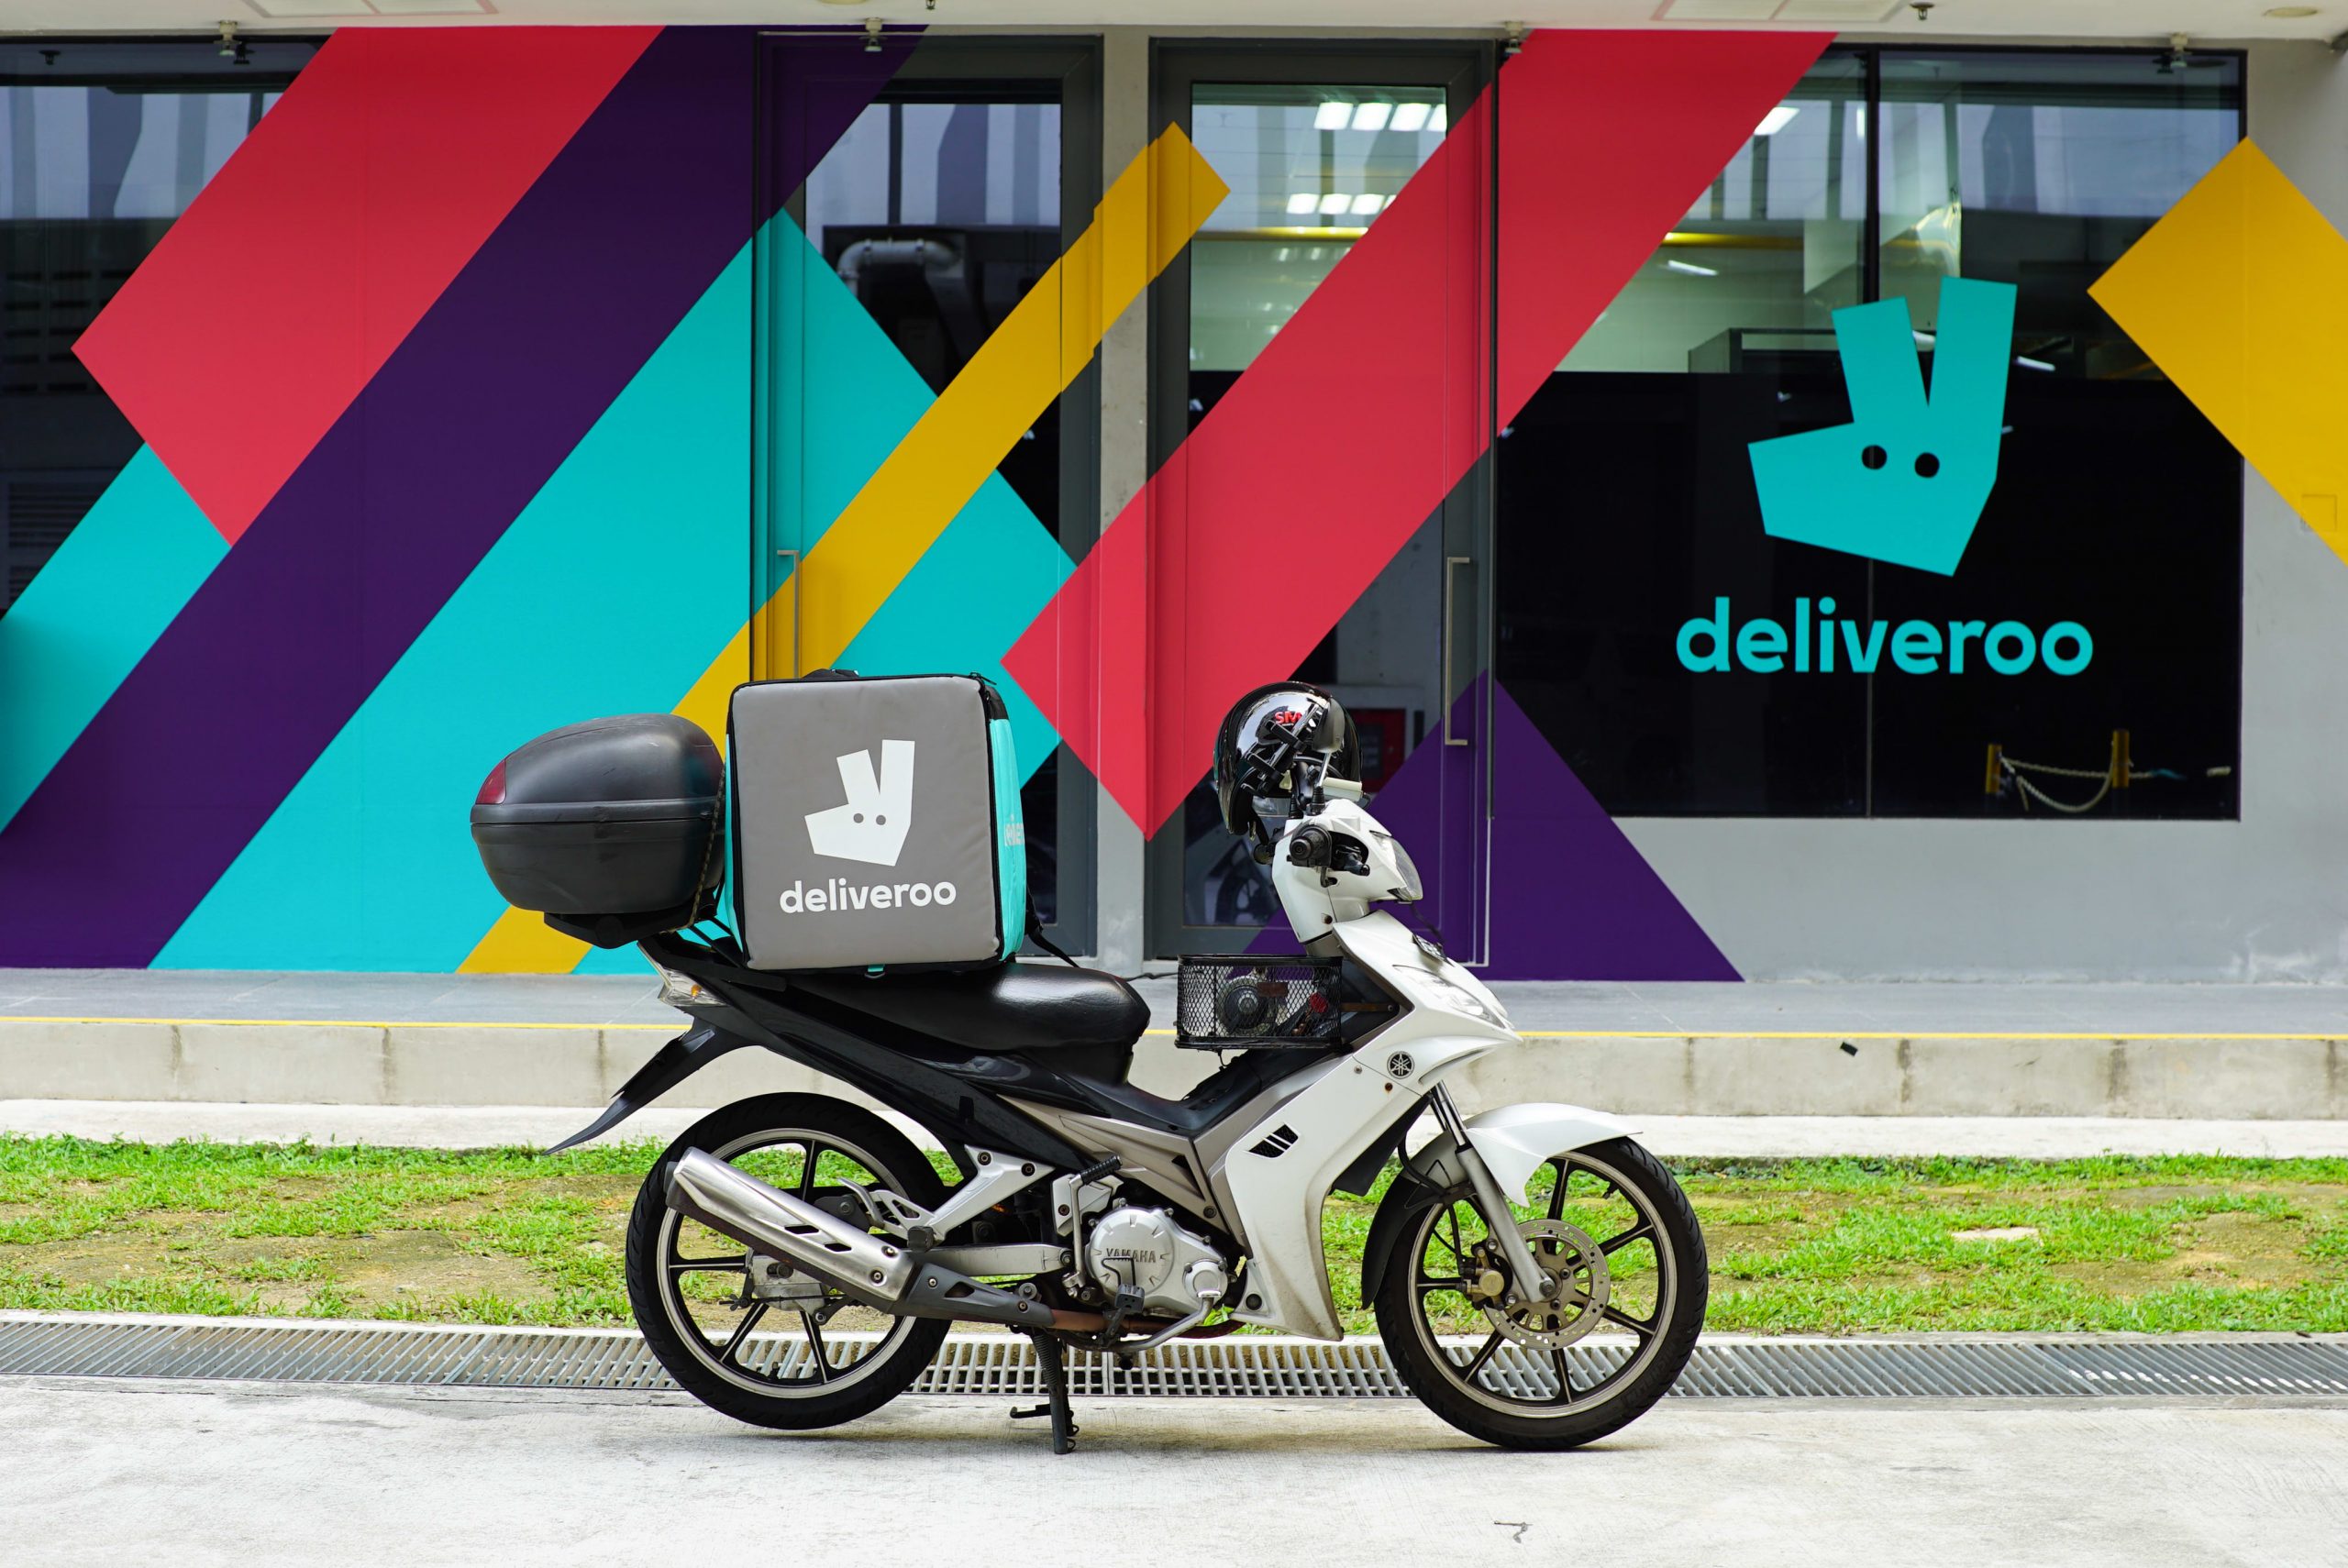 Deliveroo Jobs: How To Work In Food Delivery Service 1